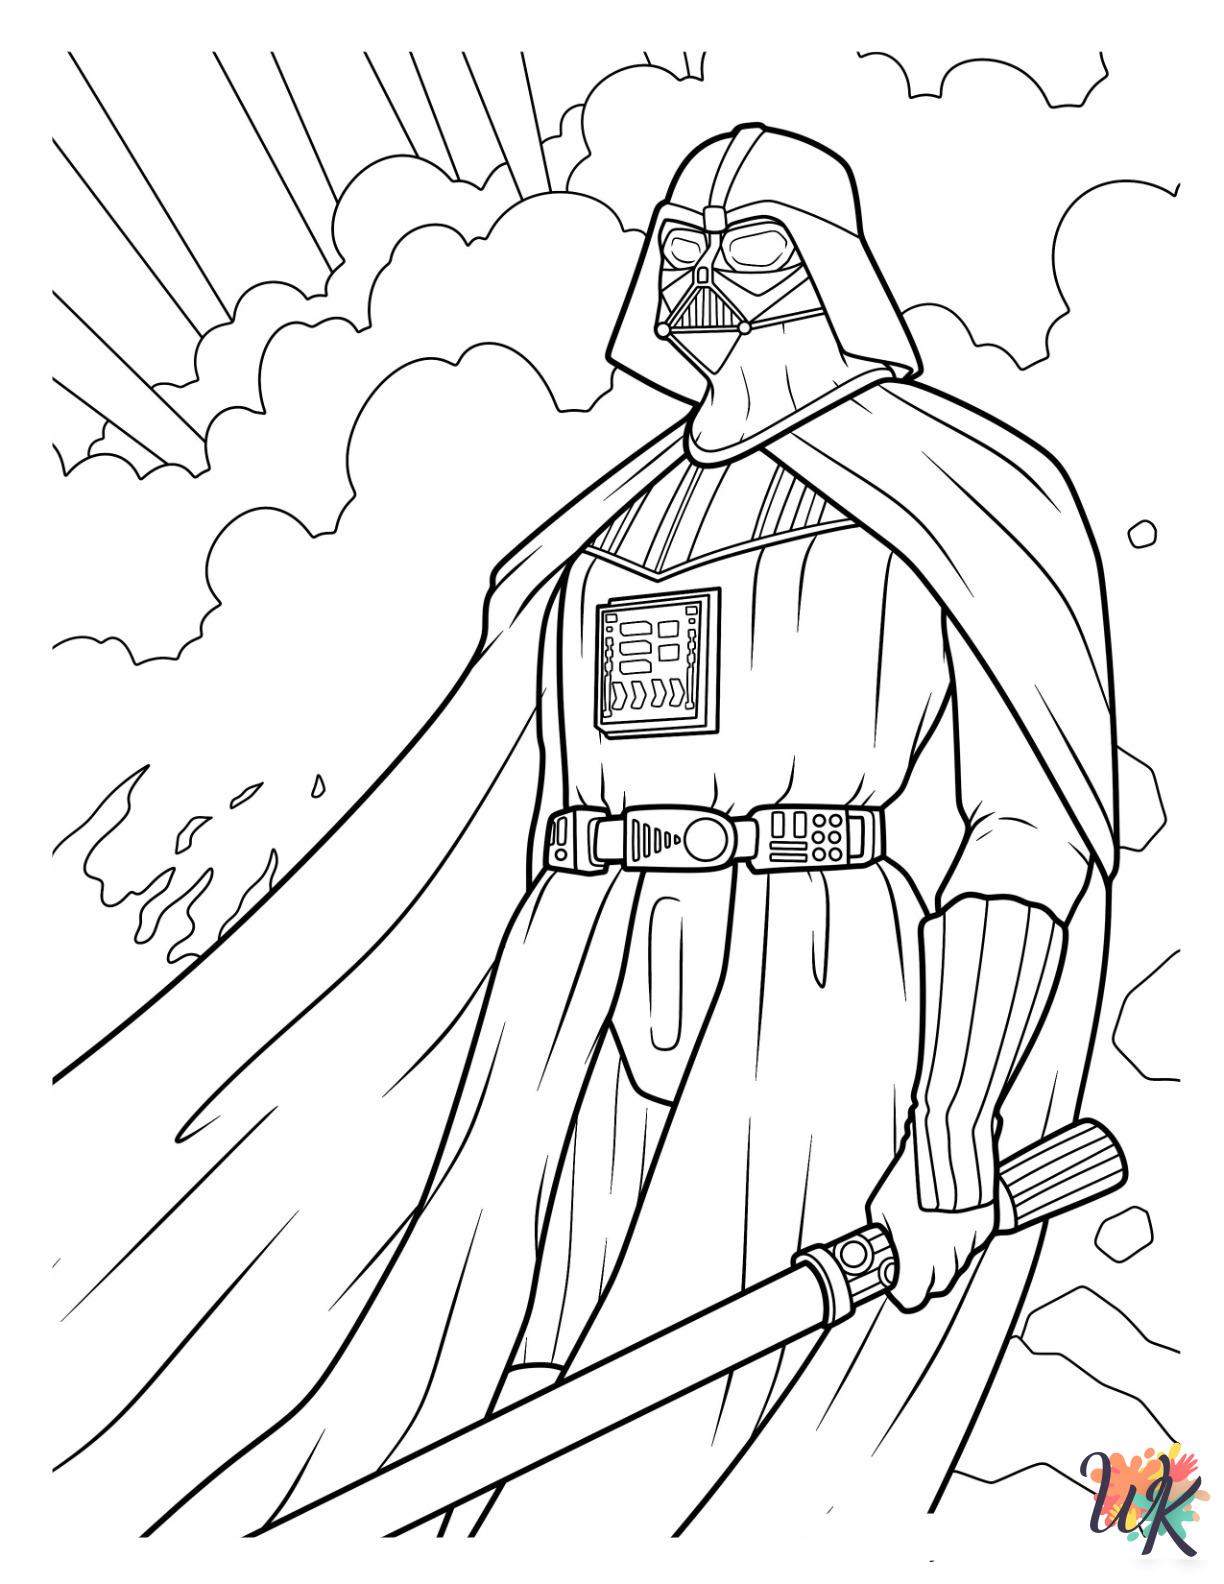 Darth Vader decorations coloring pages 1